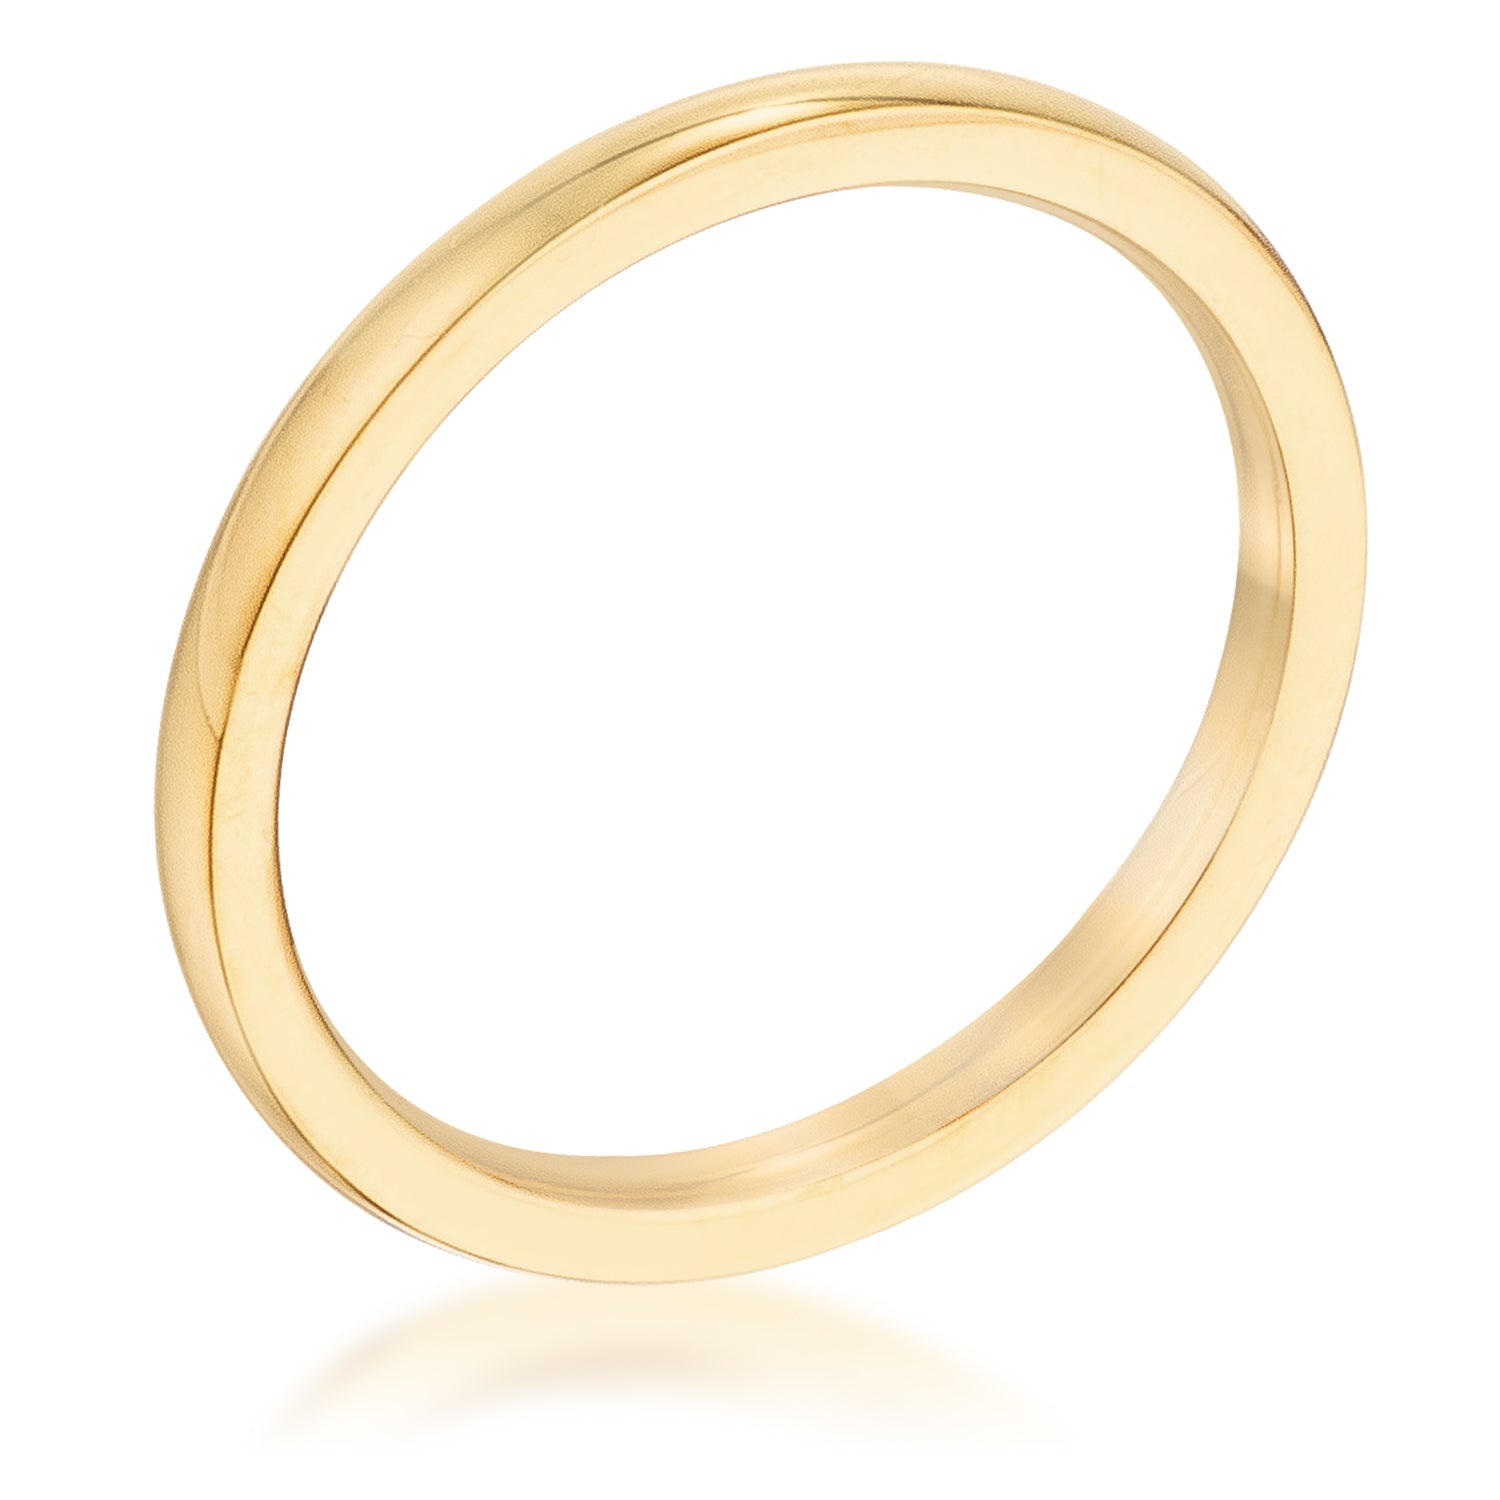 2 mm IPG Gold Stainless Steel Wedding Band - LinkagejewelrydesignLinkagejewelrydesign